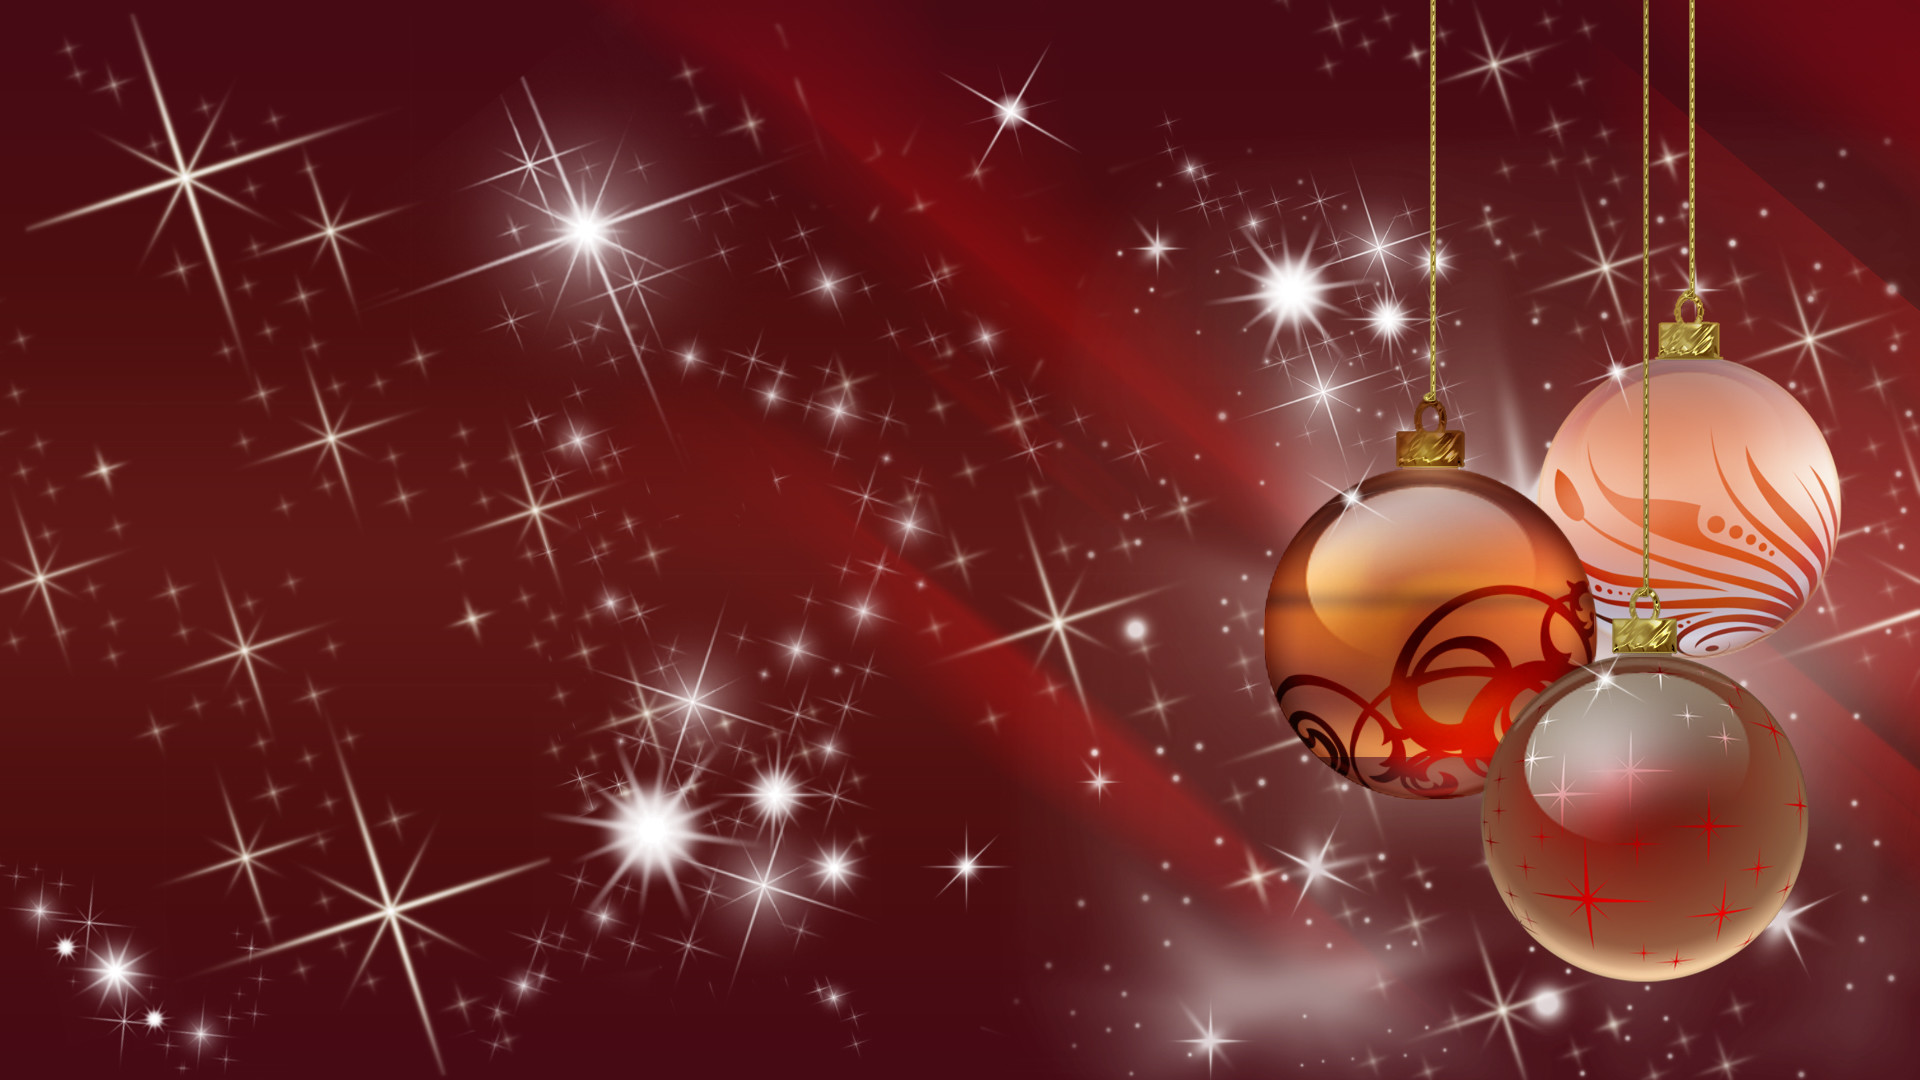 Christmas Backgrounds collection of wallpapers available for free download.  Decorate your computer desktop backgrounds with